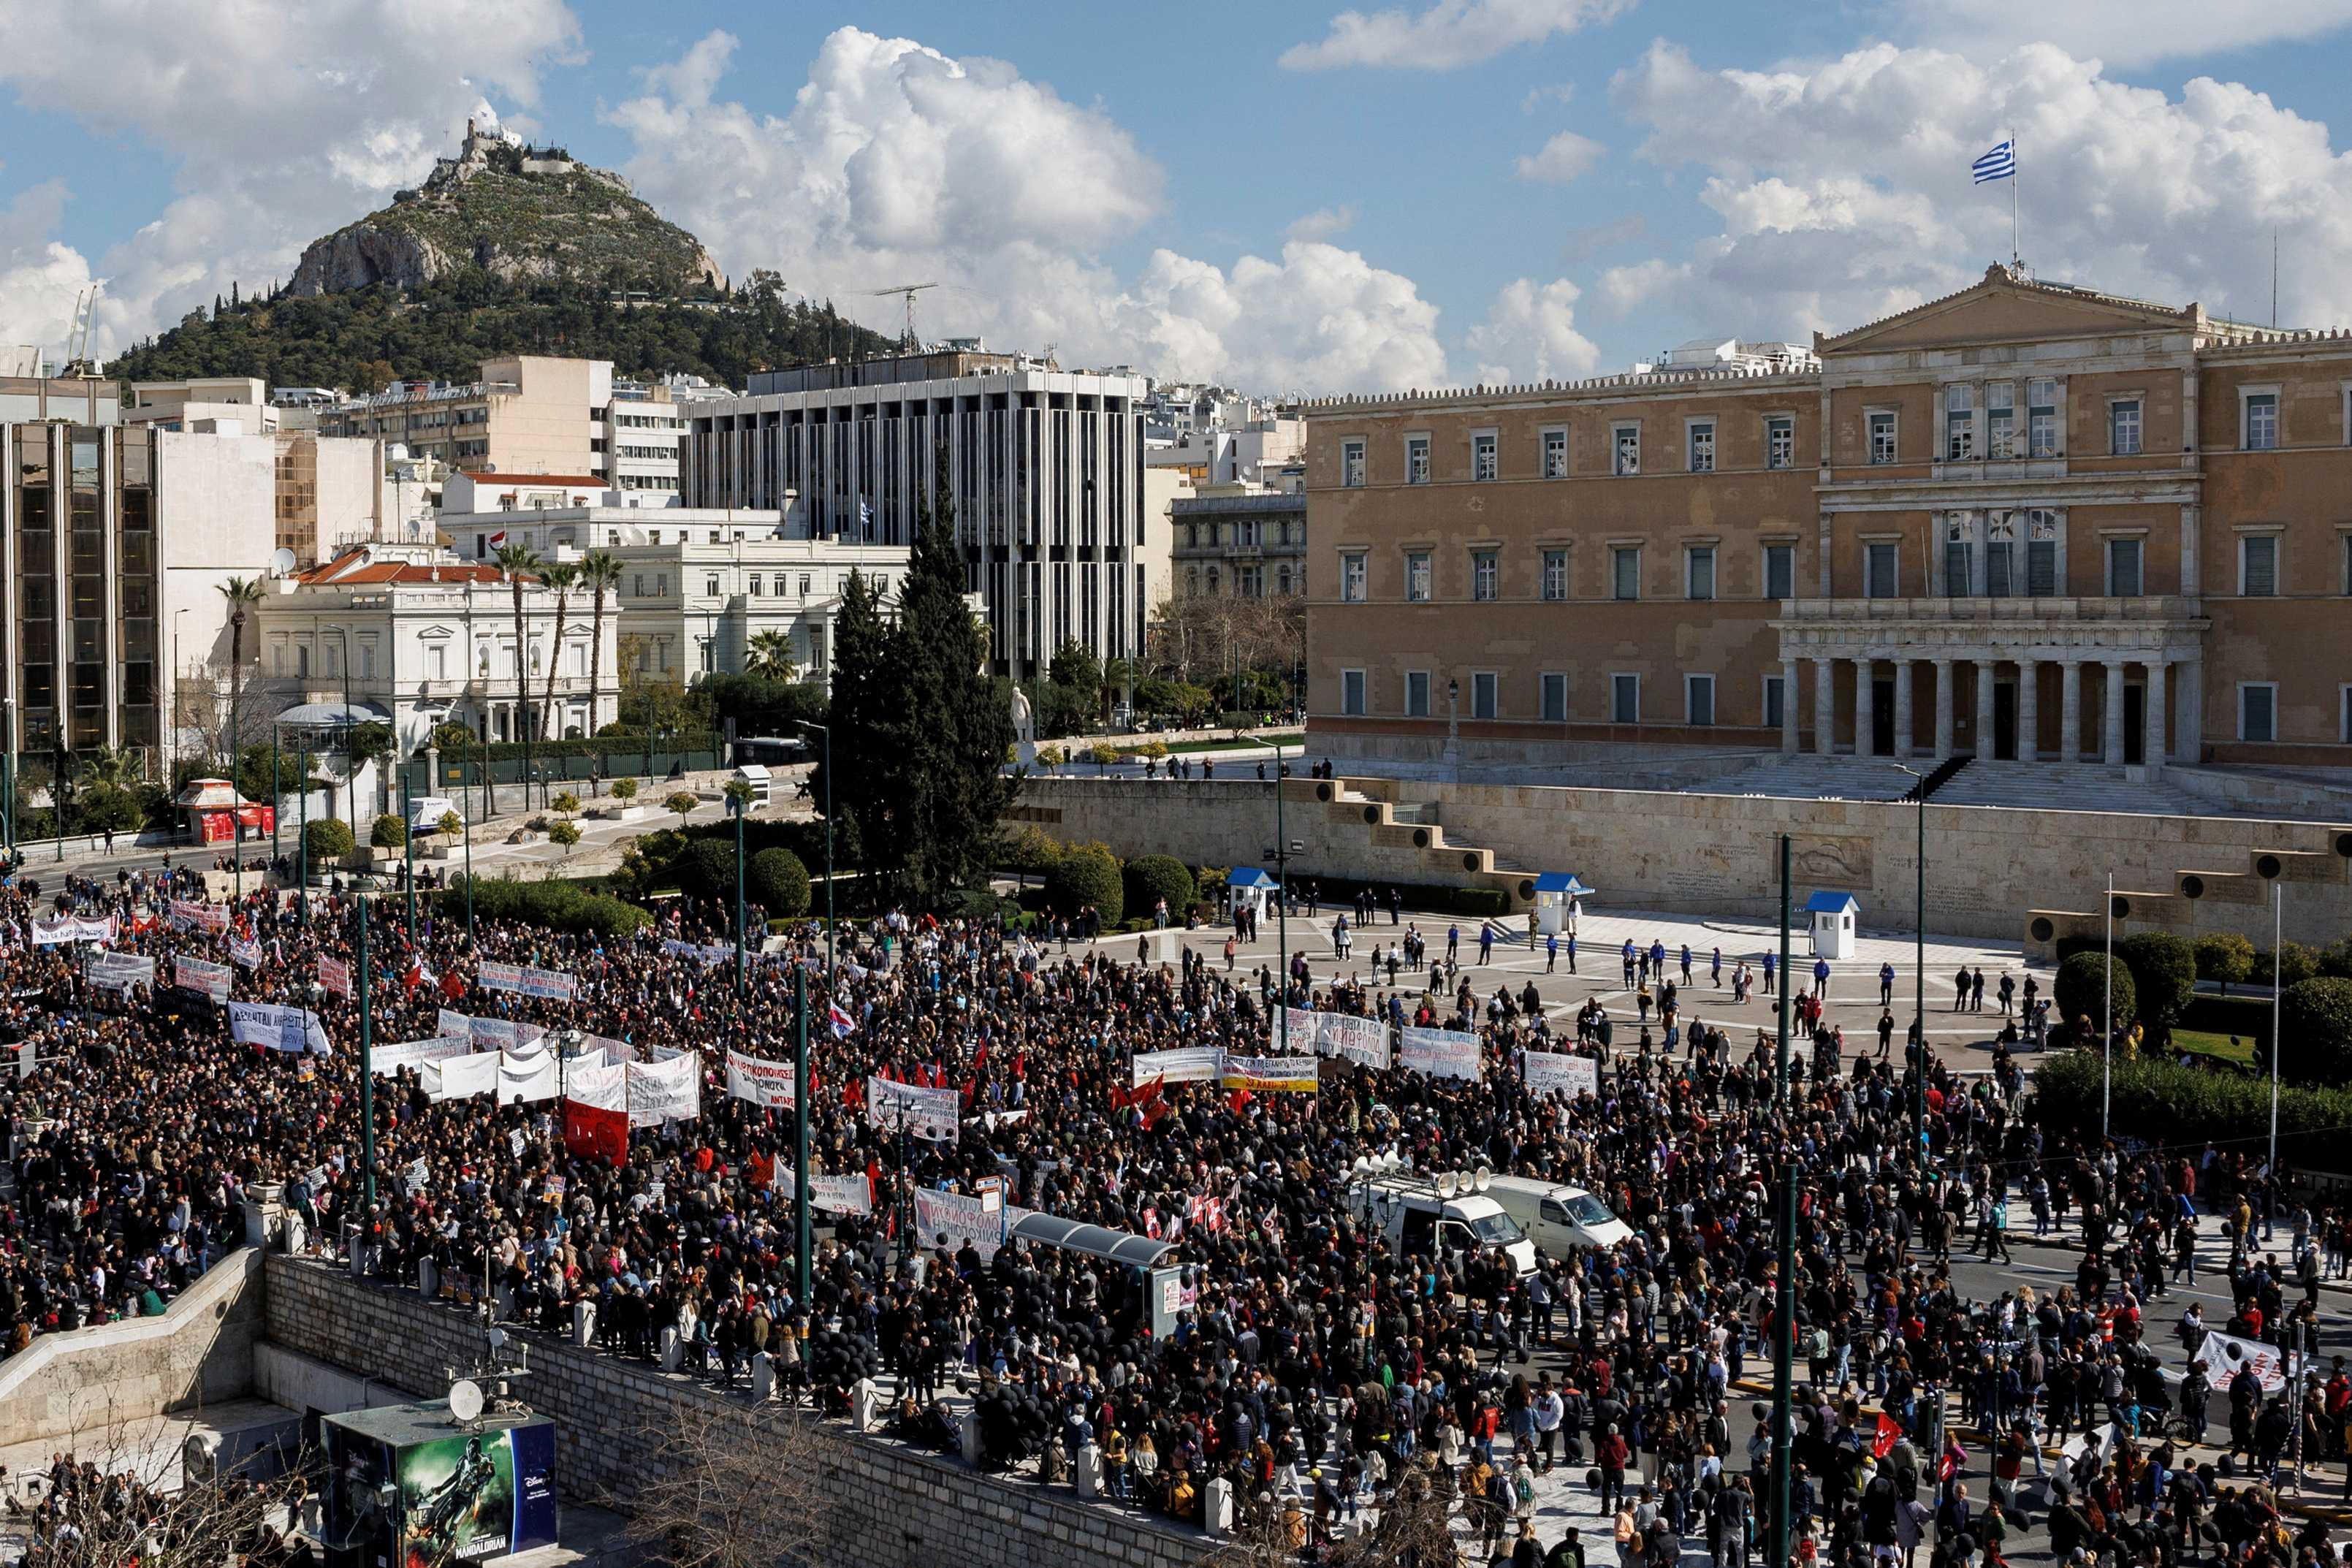 Protesters take part in a demonstration in front of the parliament building, following the collision of two trains, near the city of Larissa, in Athens, Greece, March 5. Photo: Reuters